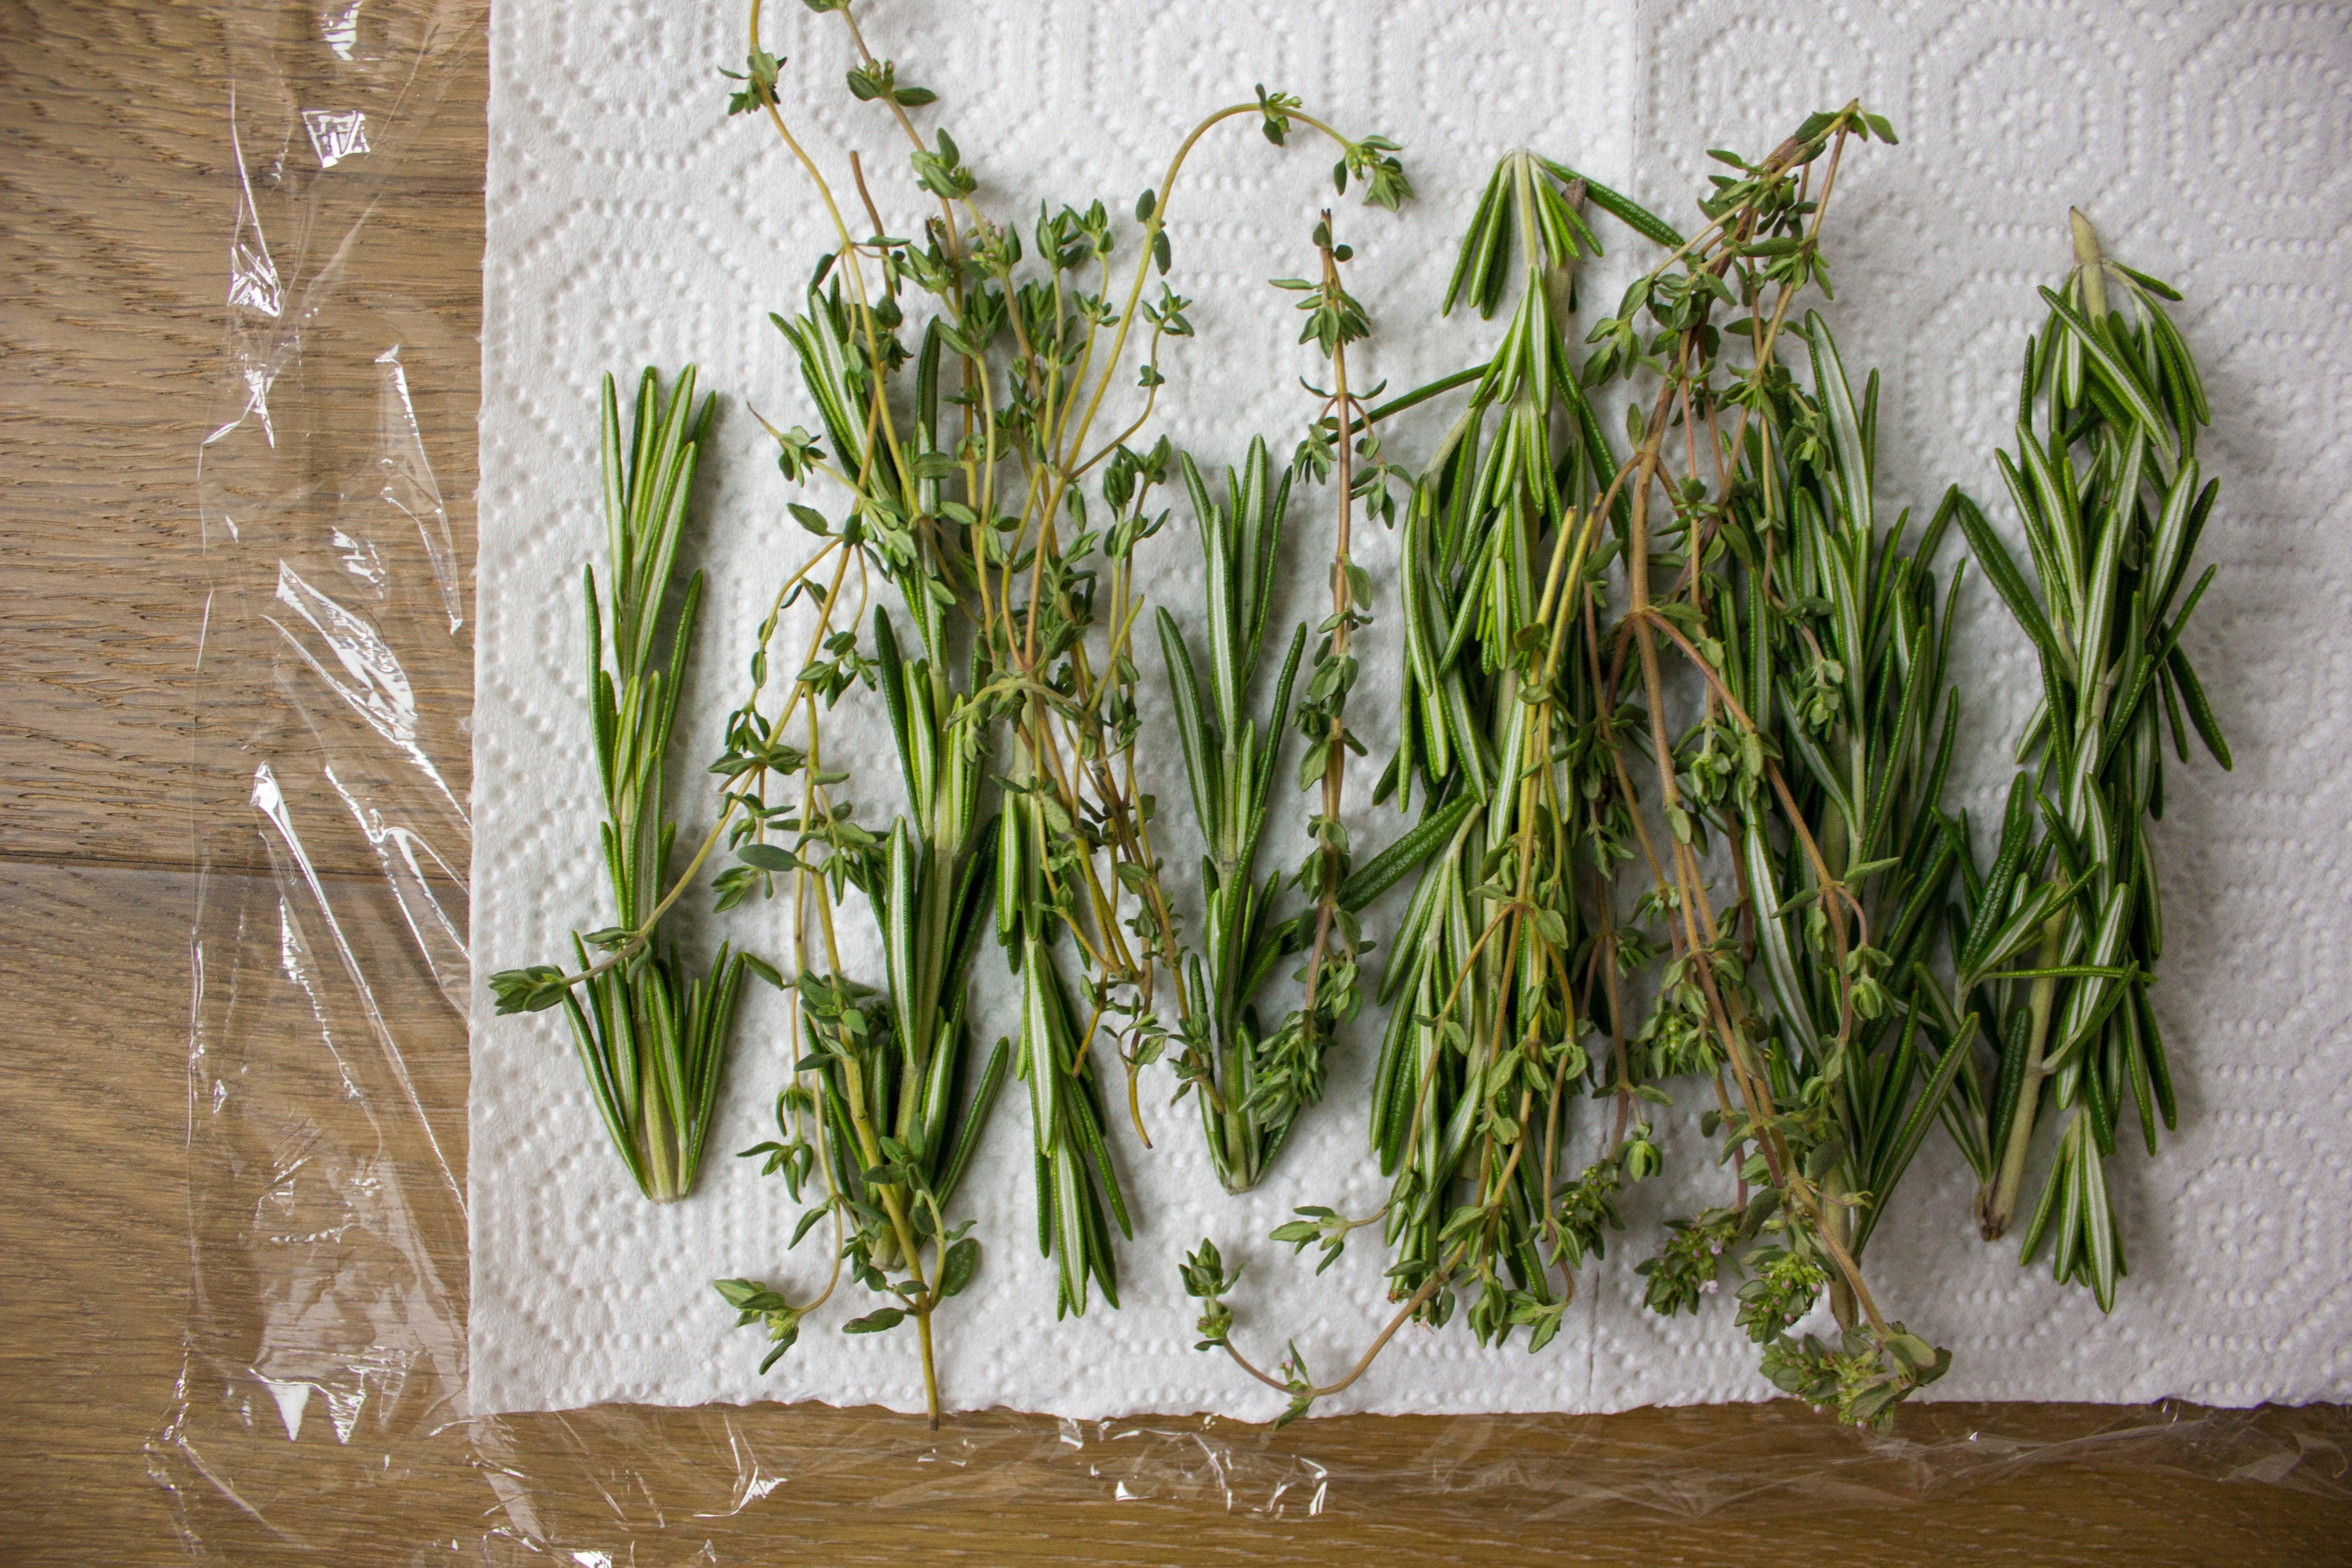 Ask the Editors: How to Make Fresh Herbs Last